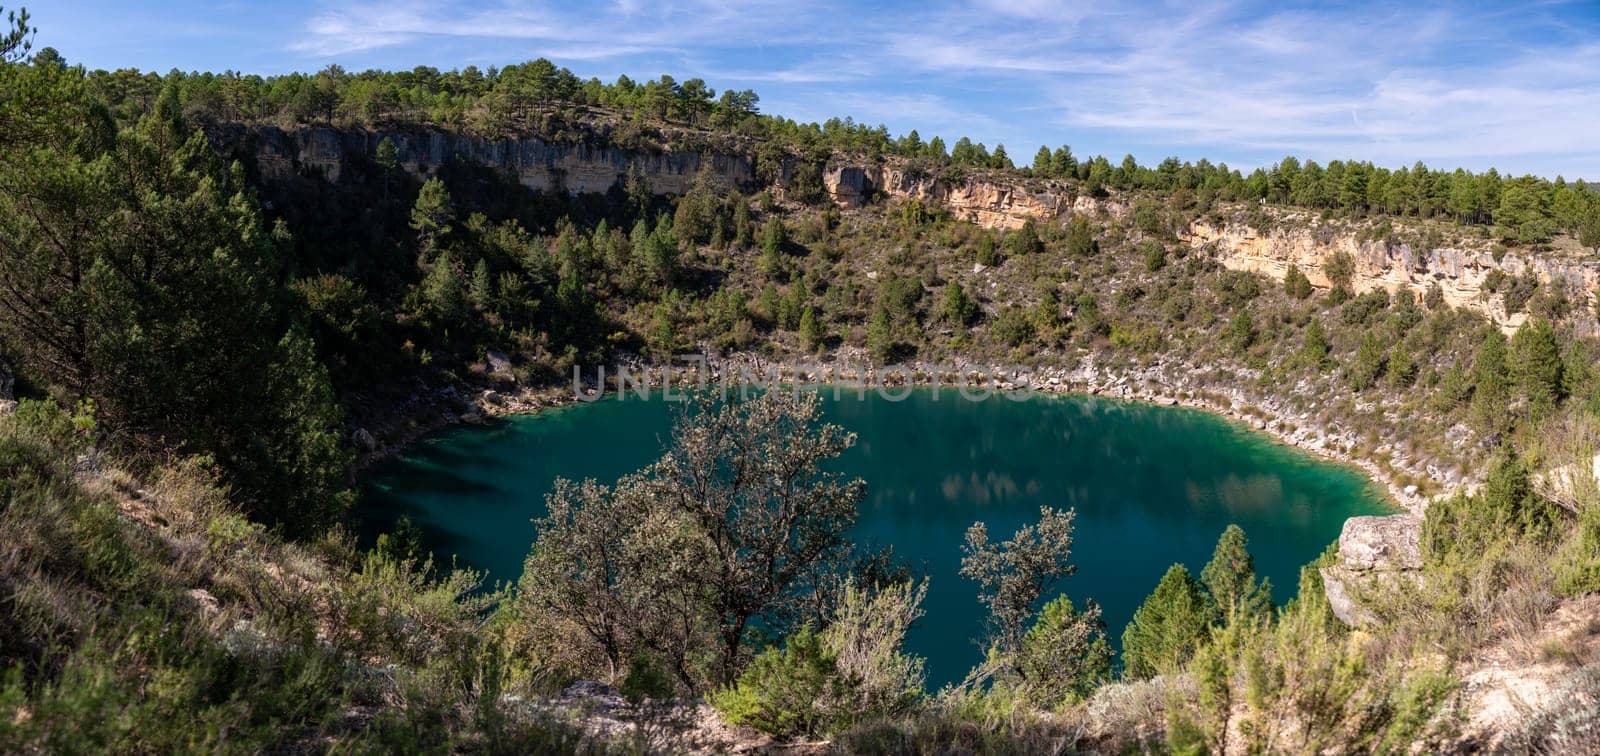 A tranquil turquoise lake within a lush forest under a clear sky.